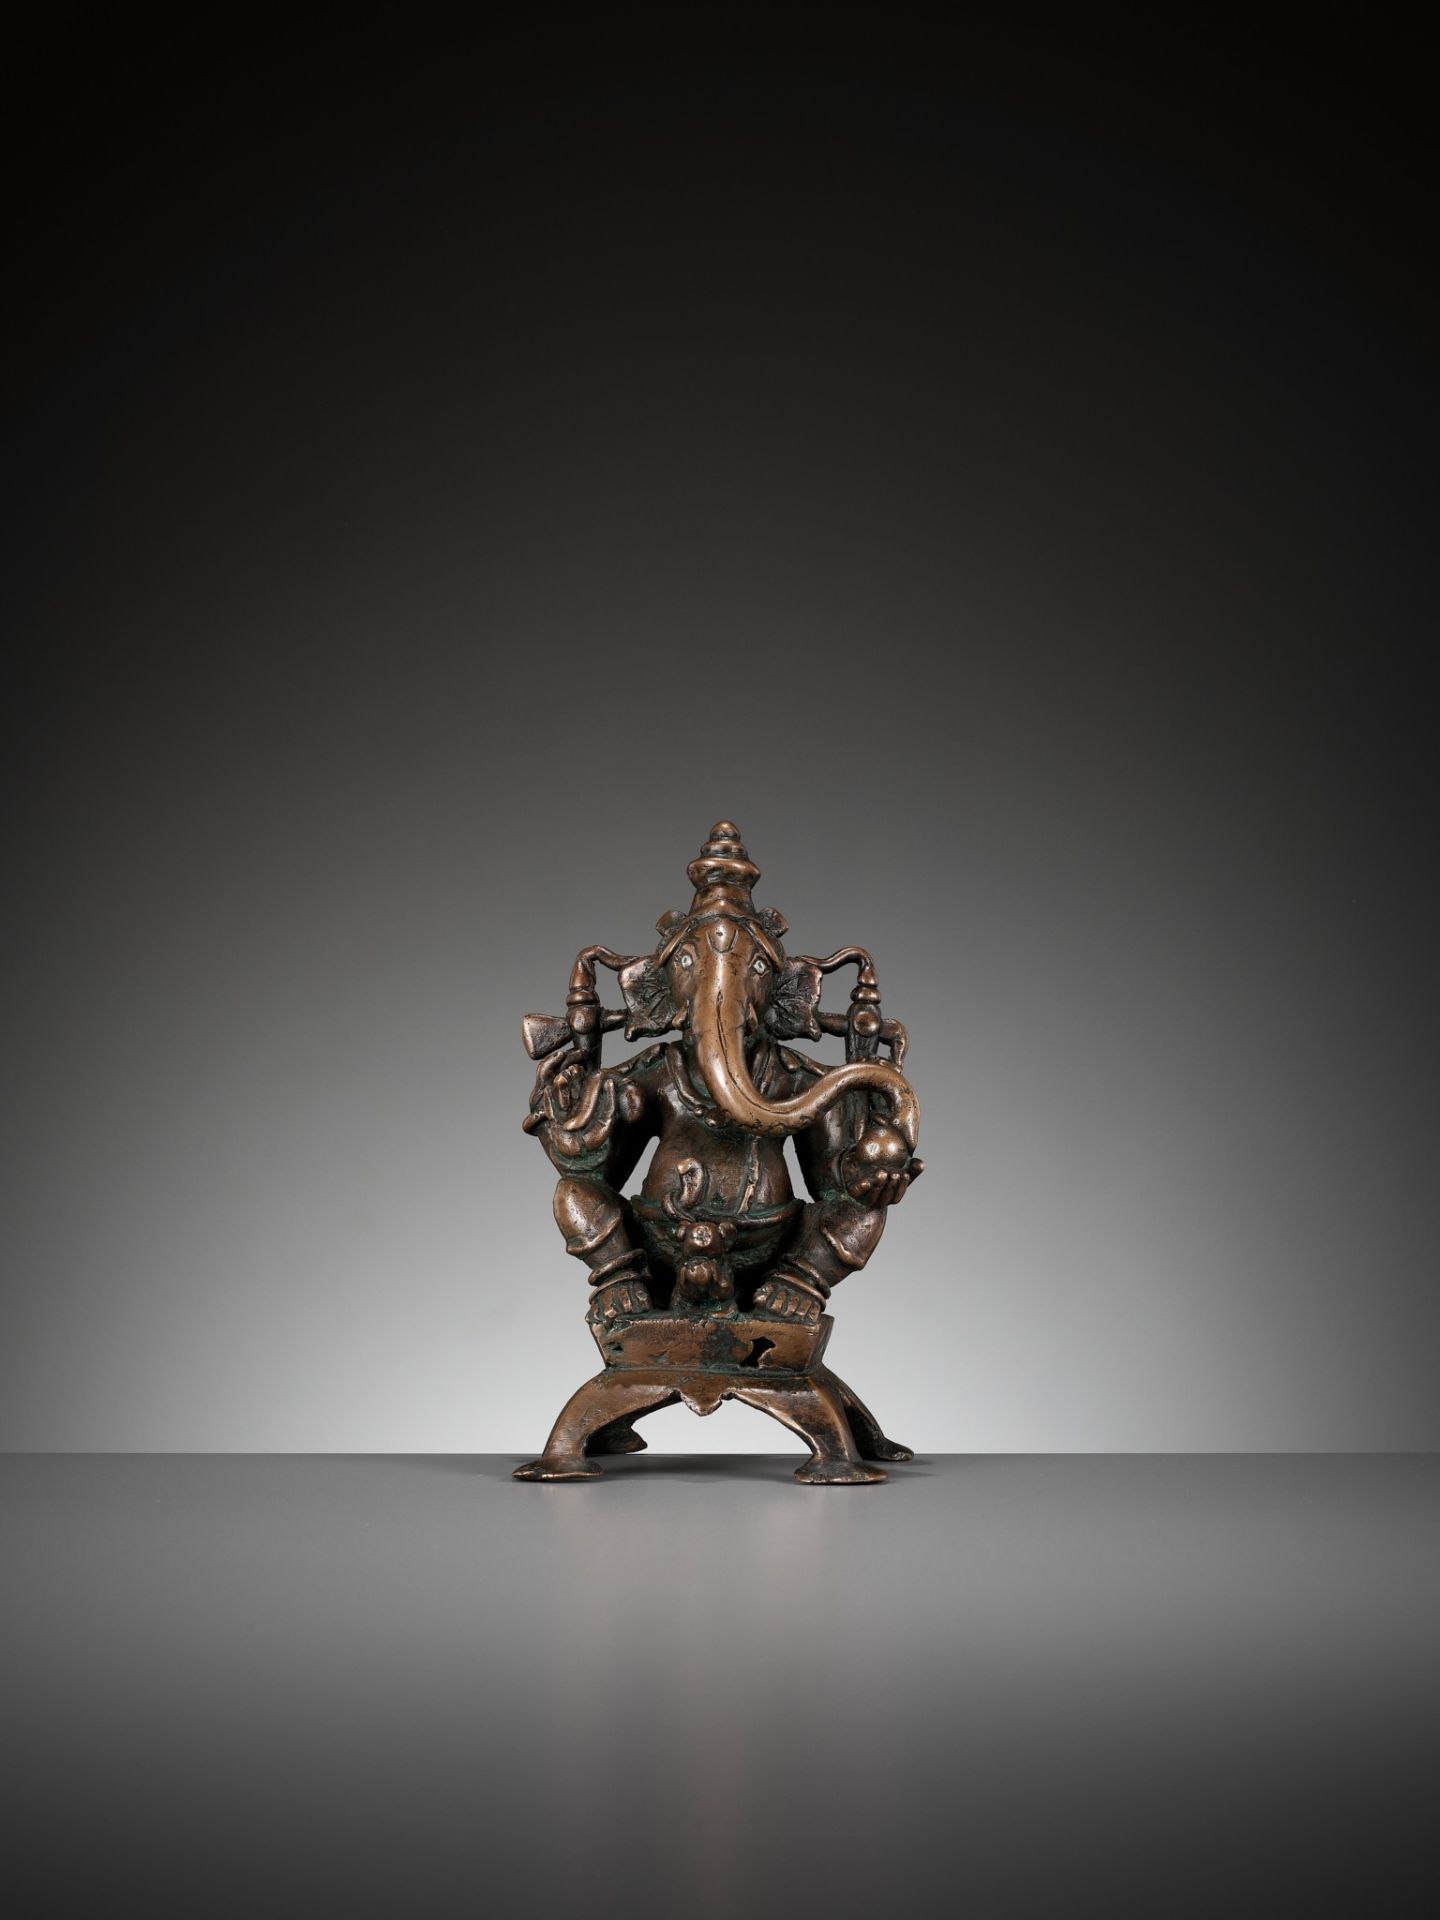 A SILVER-INLAID COPPER ALLOY FIGURE OF GANESHA, SOUTH INDIA, C. 1650-1750 - Image 11 of 12